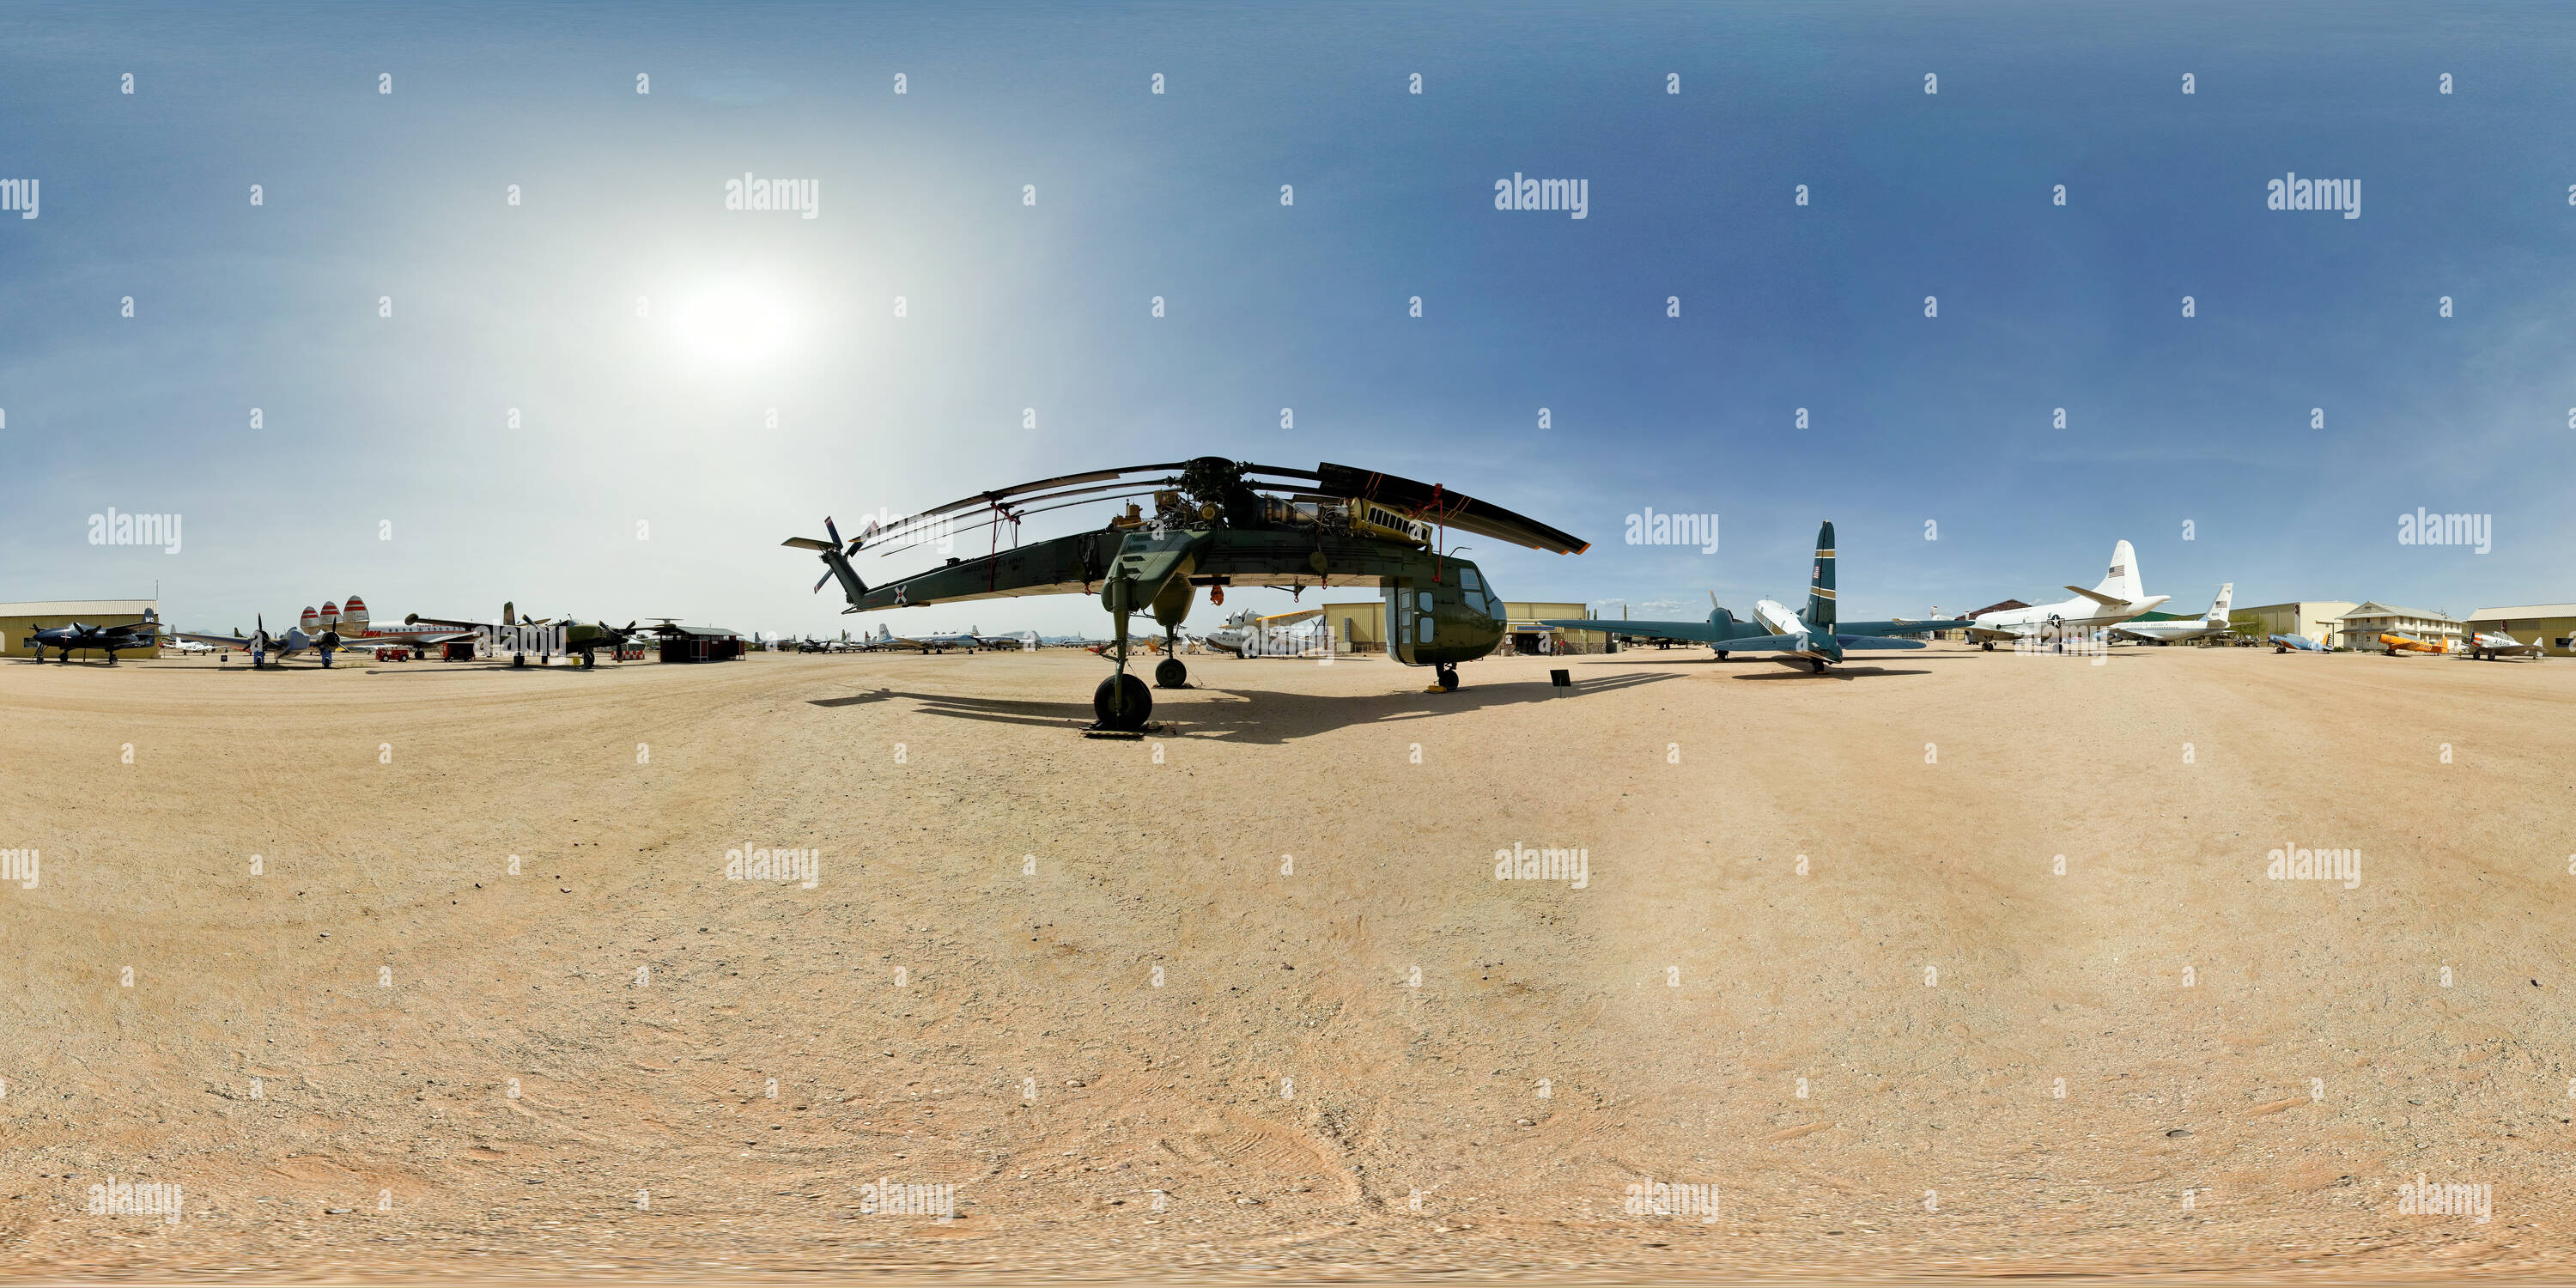 360 degree panoramic view of CH-54A 'Tarhe' (Sky Crane), Pima Air and Space Museum, Tucson